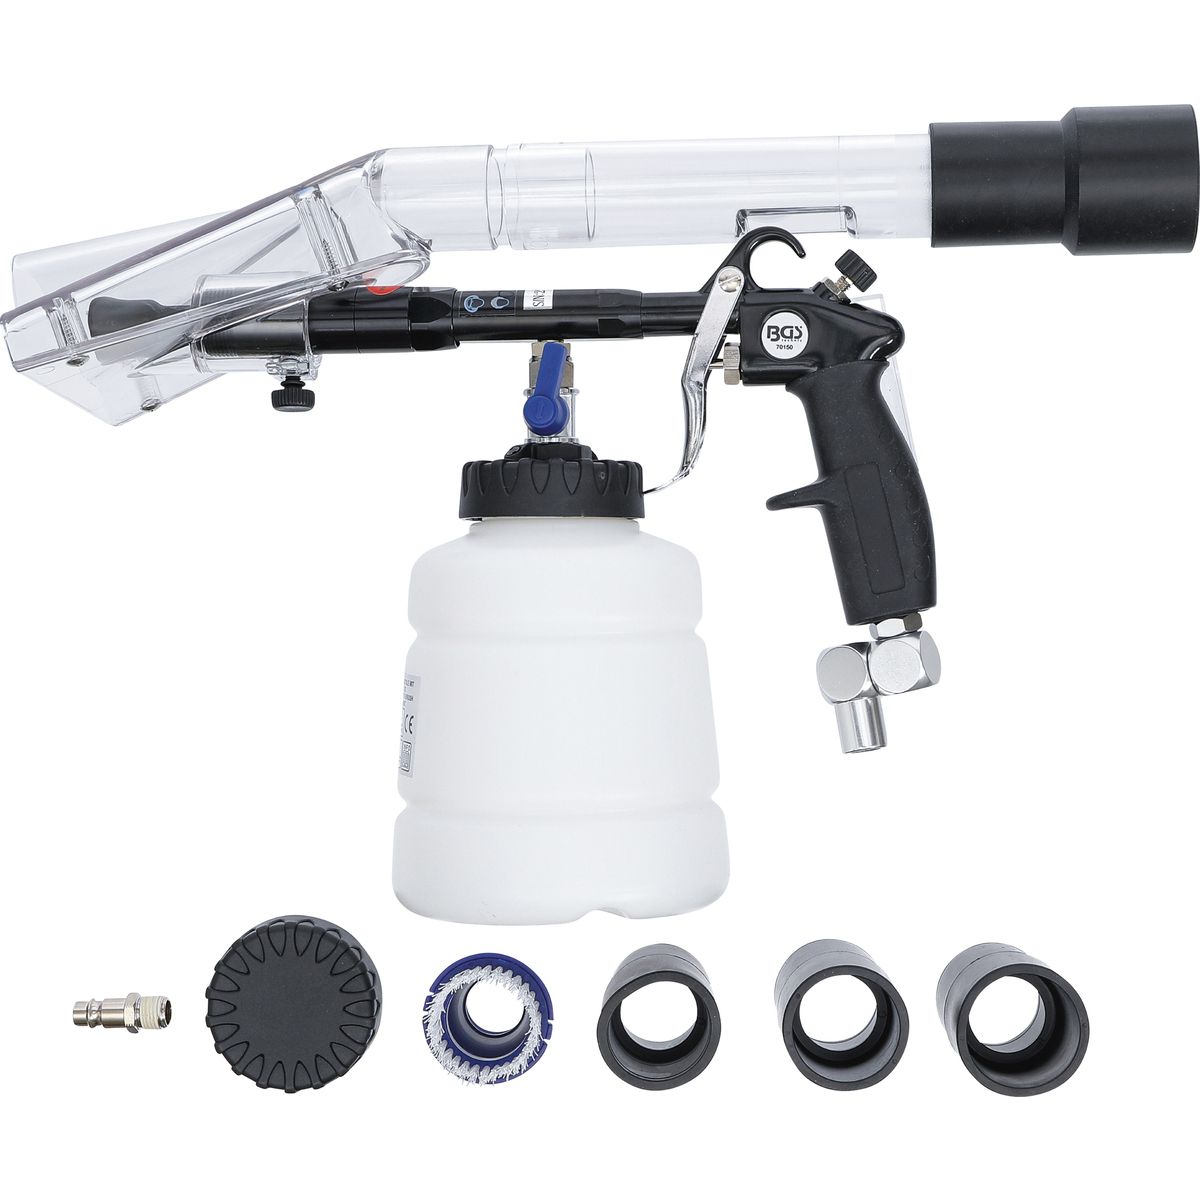 Twister Cleaning Gun with Brush and Extractor Attachment | 7 pcs.